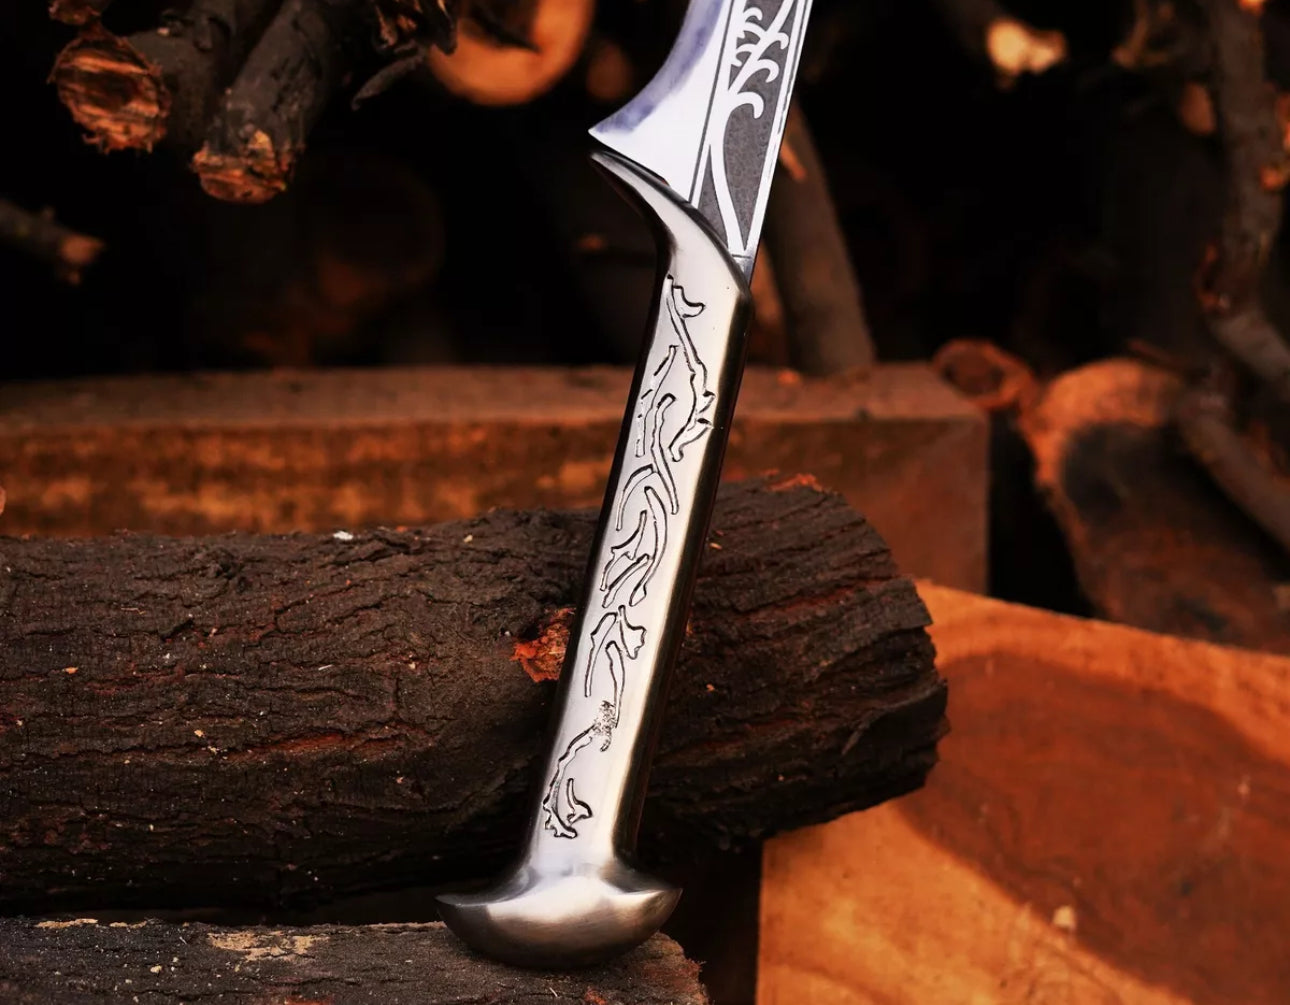 THRANDUIL'S SWORD | The Hobbit Elven King's Blade from The Lord of the Rings